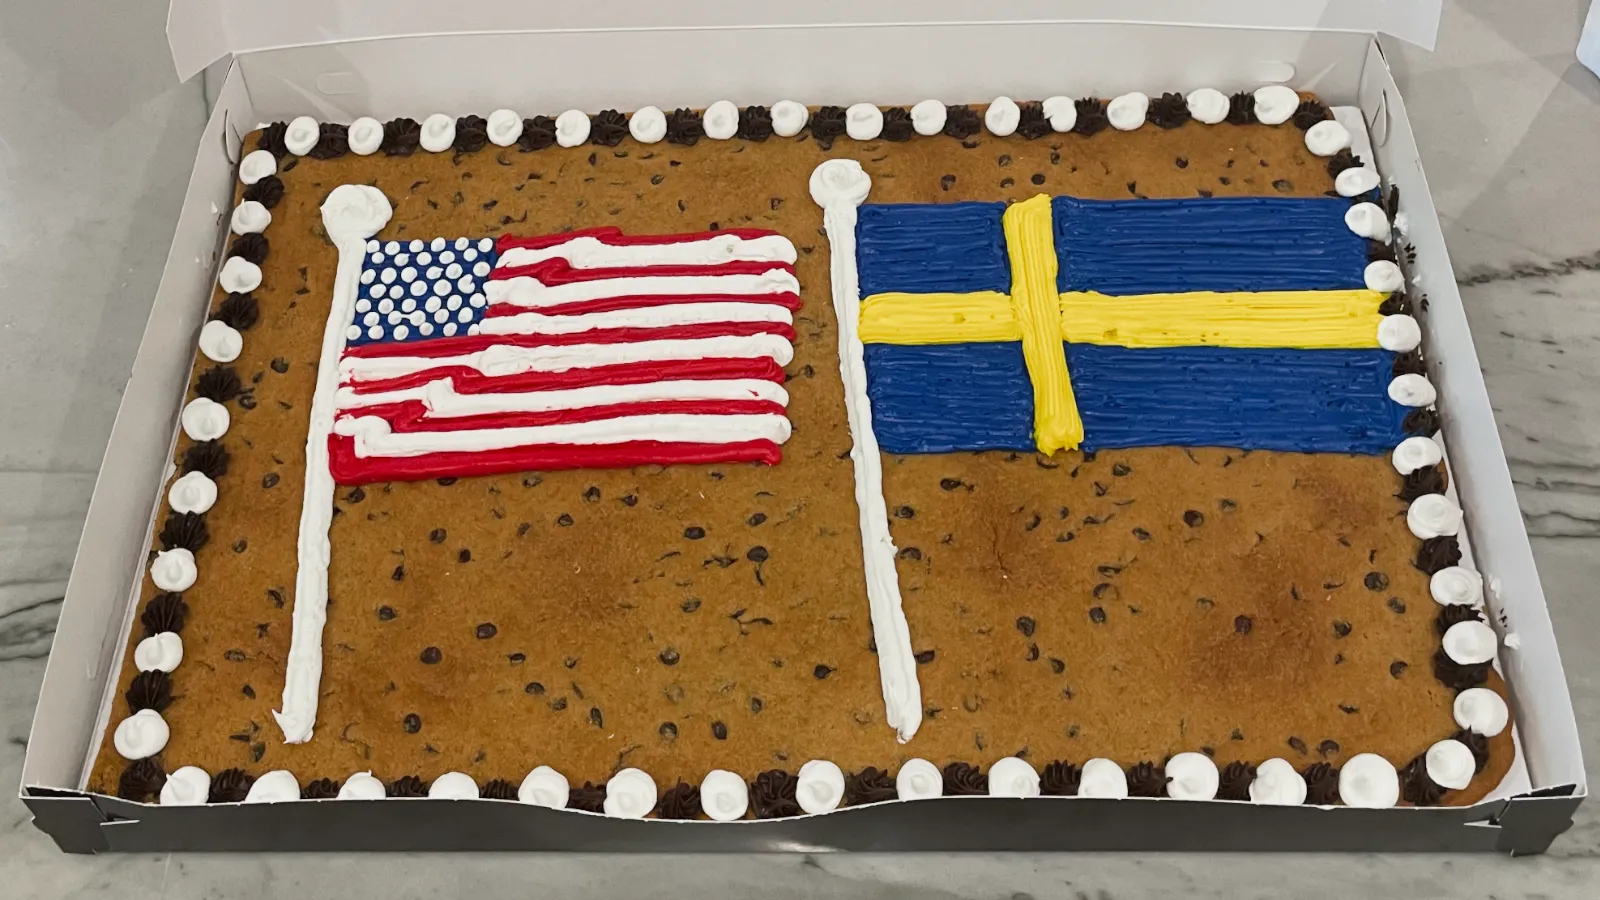 Cookie cake with US flag and Sverige flag